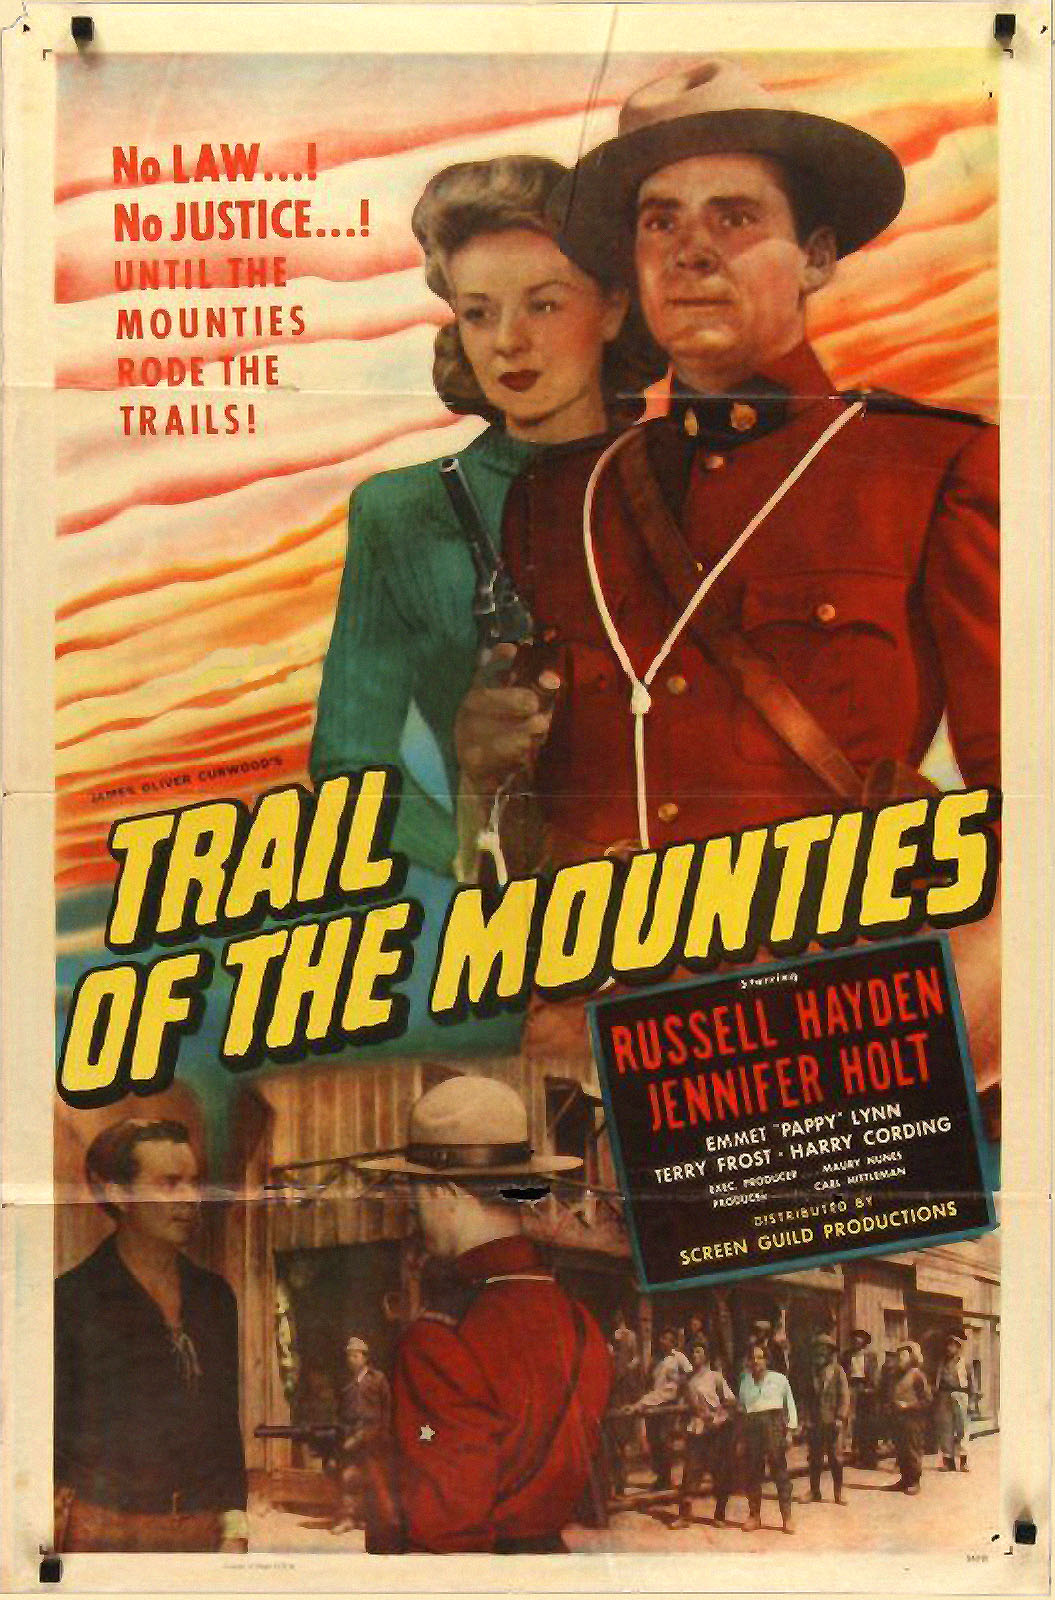 TRAIL OF THE MOUNTIES